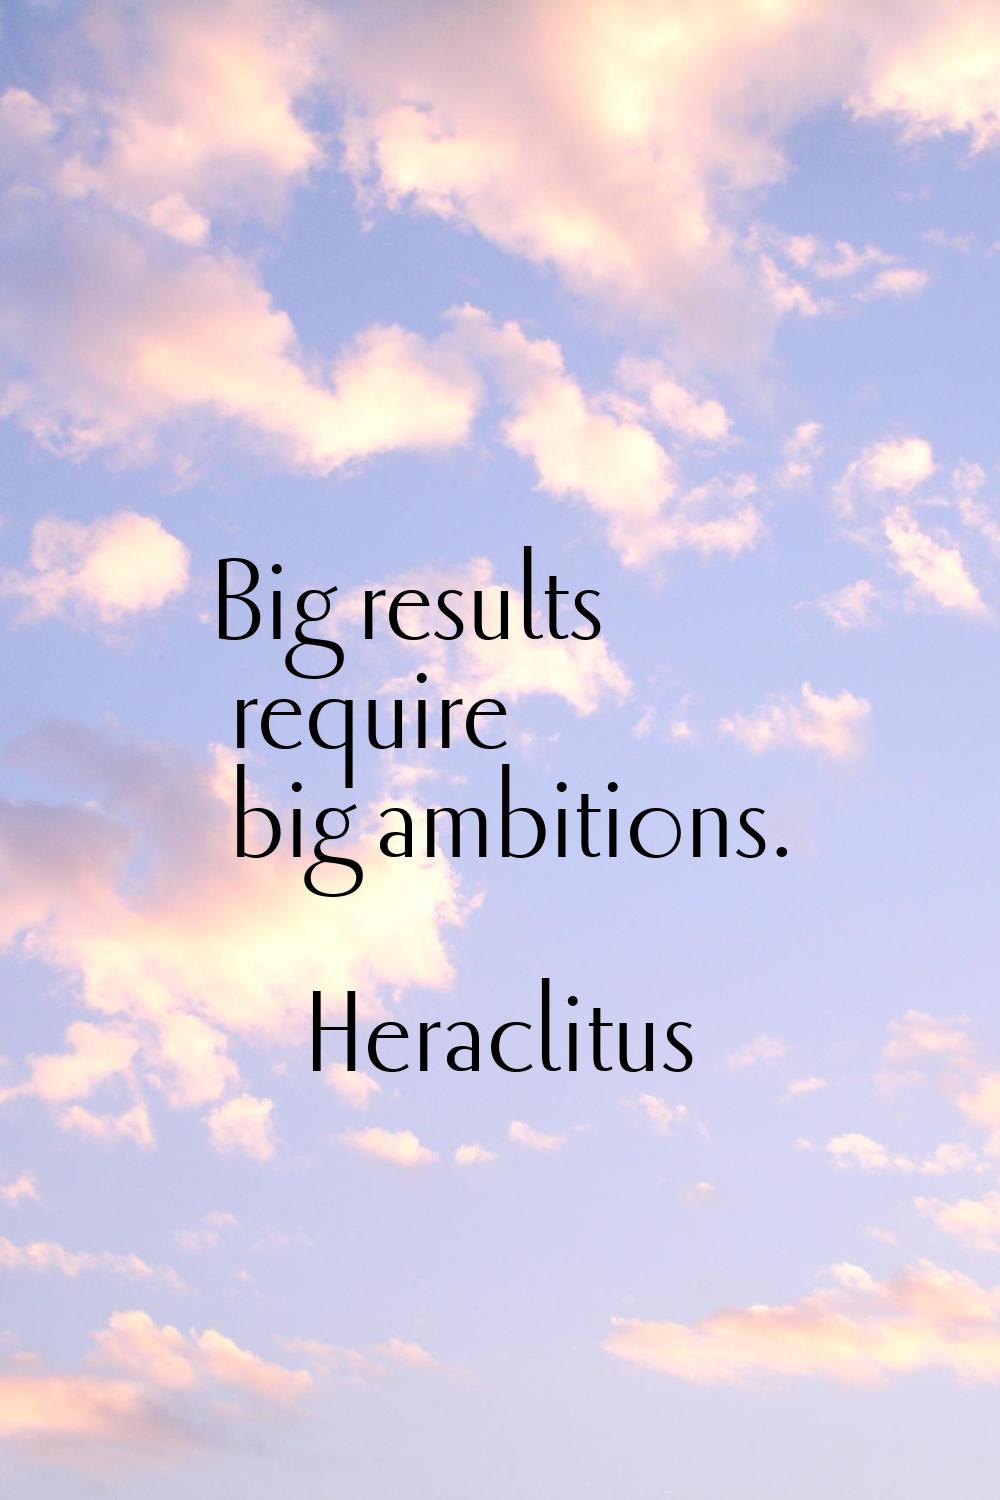 Big results require big ambitions.